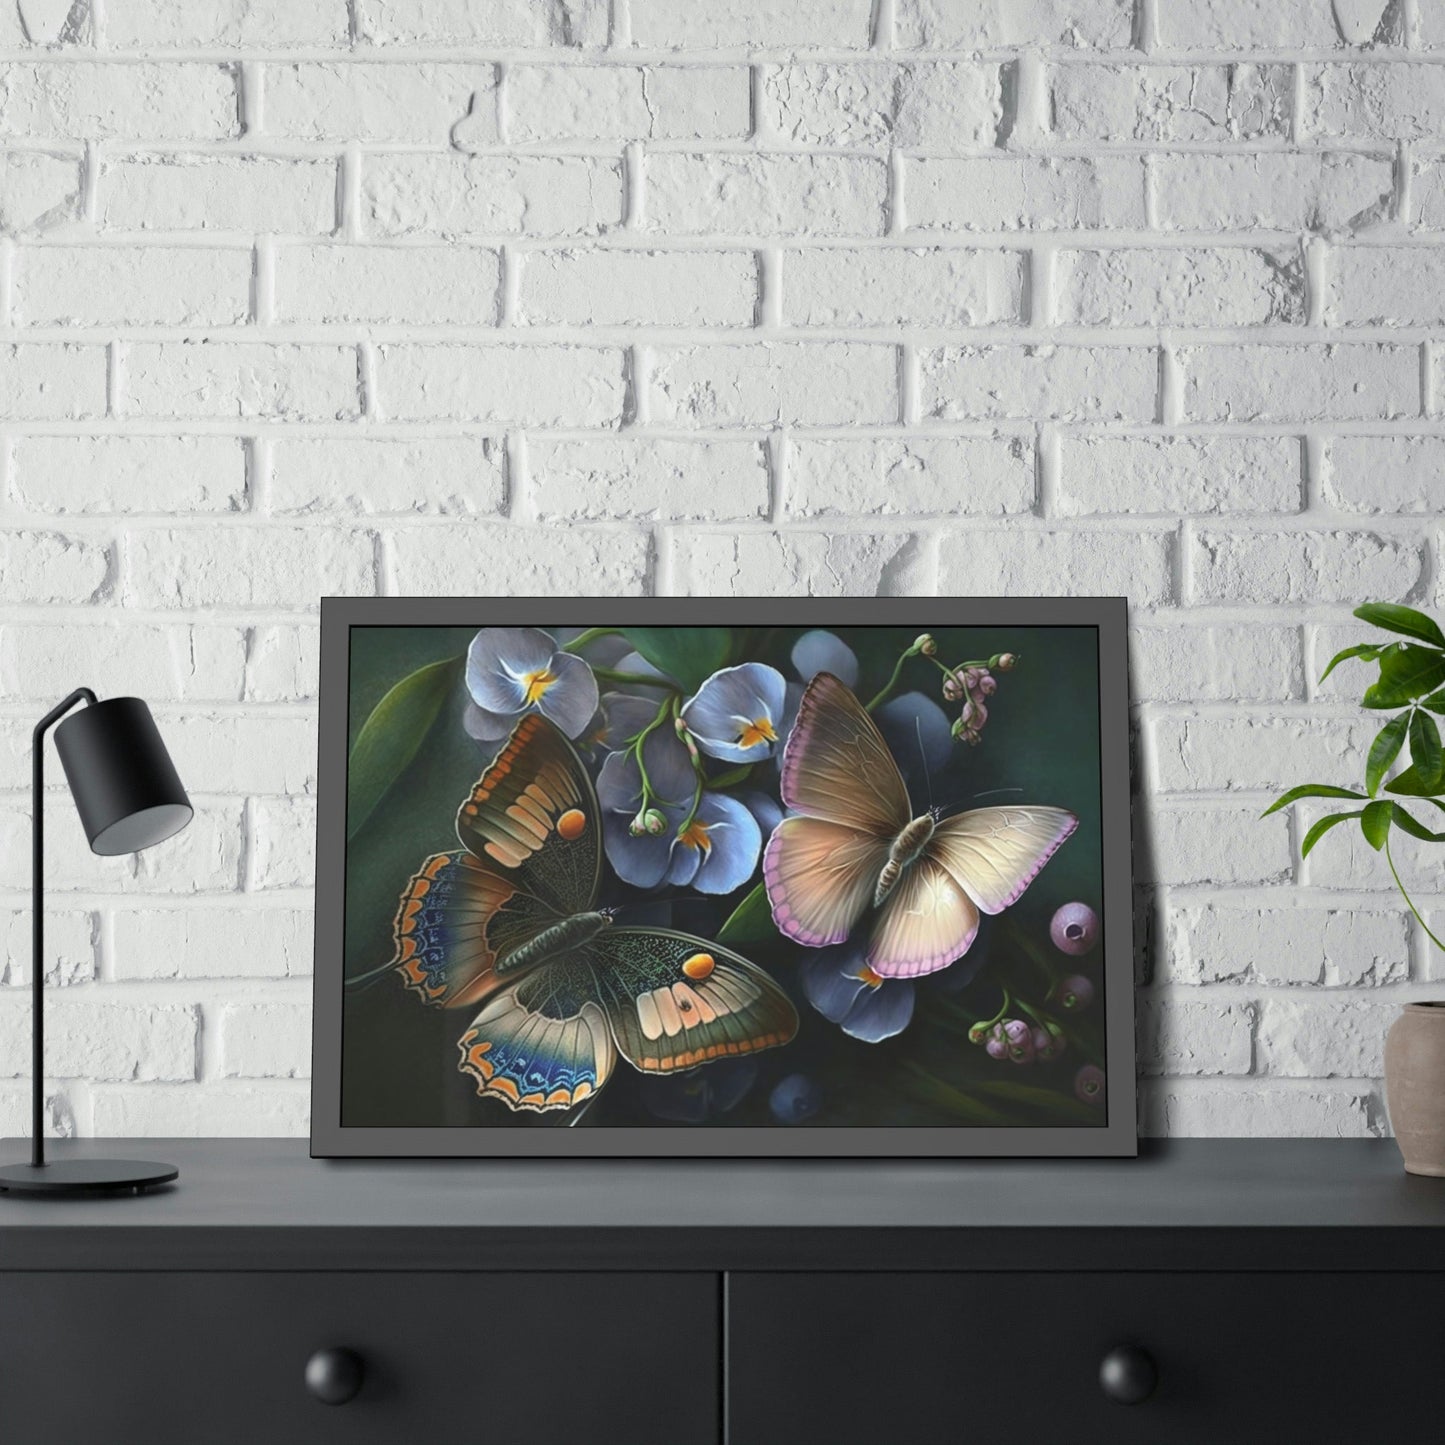 Butterfly Garden: Framed Canvas & Poster Art Print of Fluttering Insects